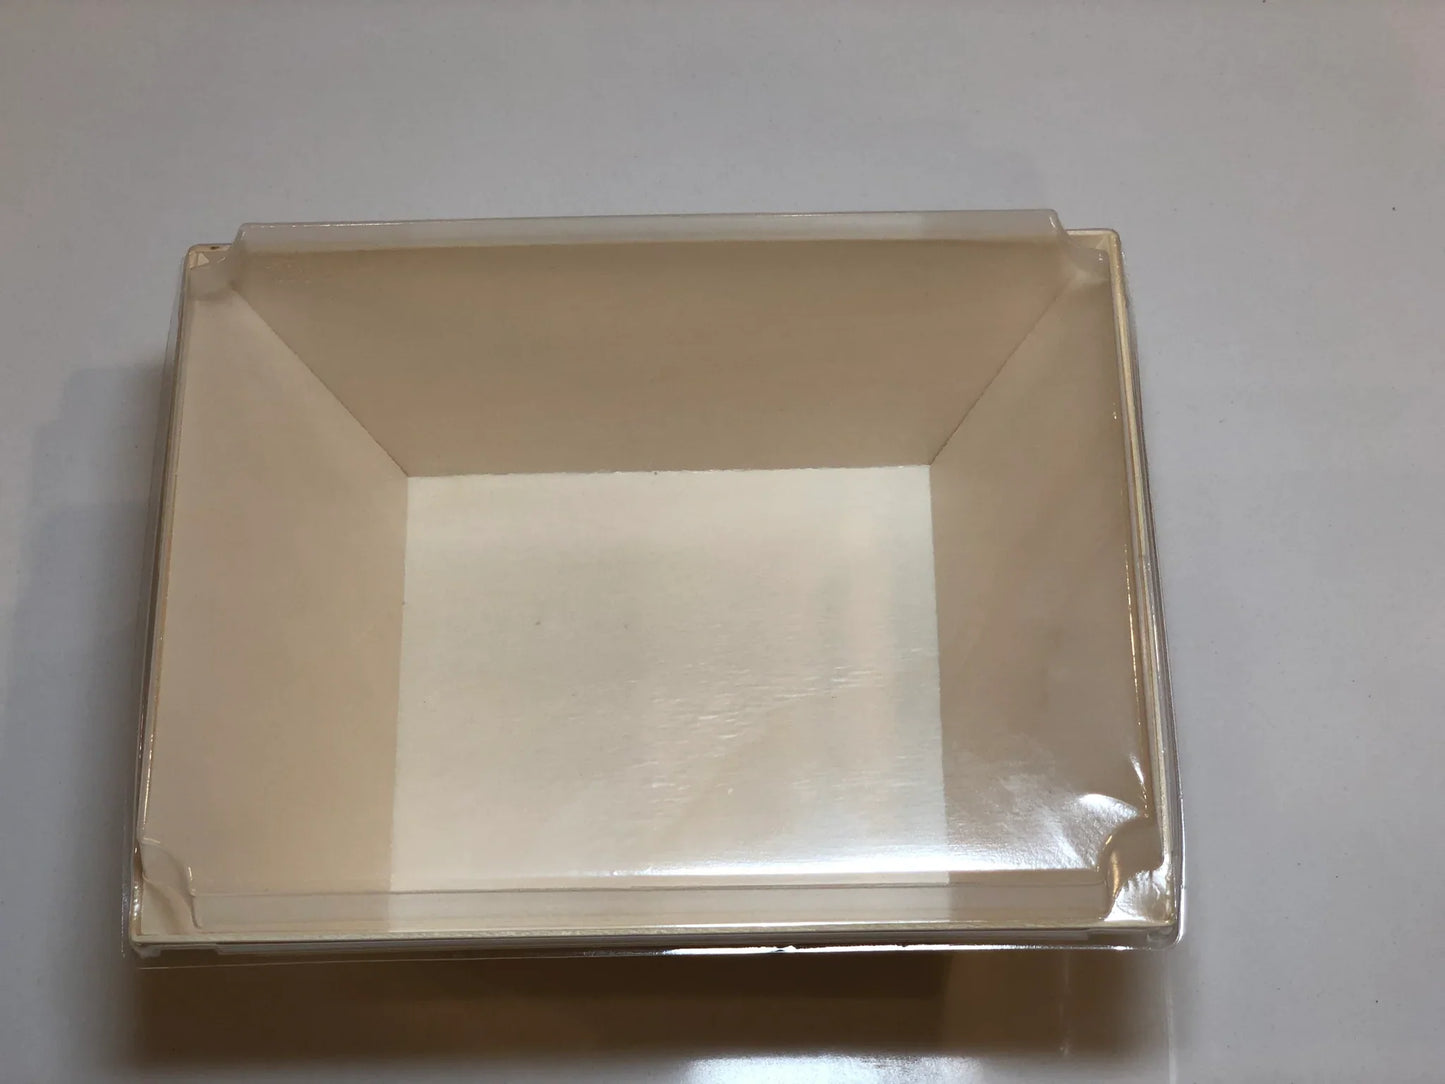 6" X 8" X 3" Covered Tray Set | Compostable Balsa Tray with RPET Lid | 100 of each (Case of 100)